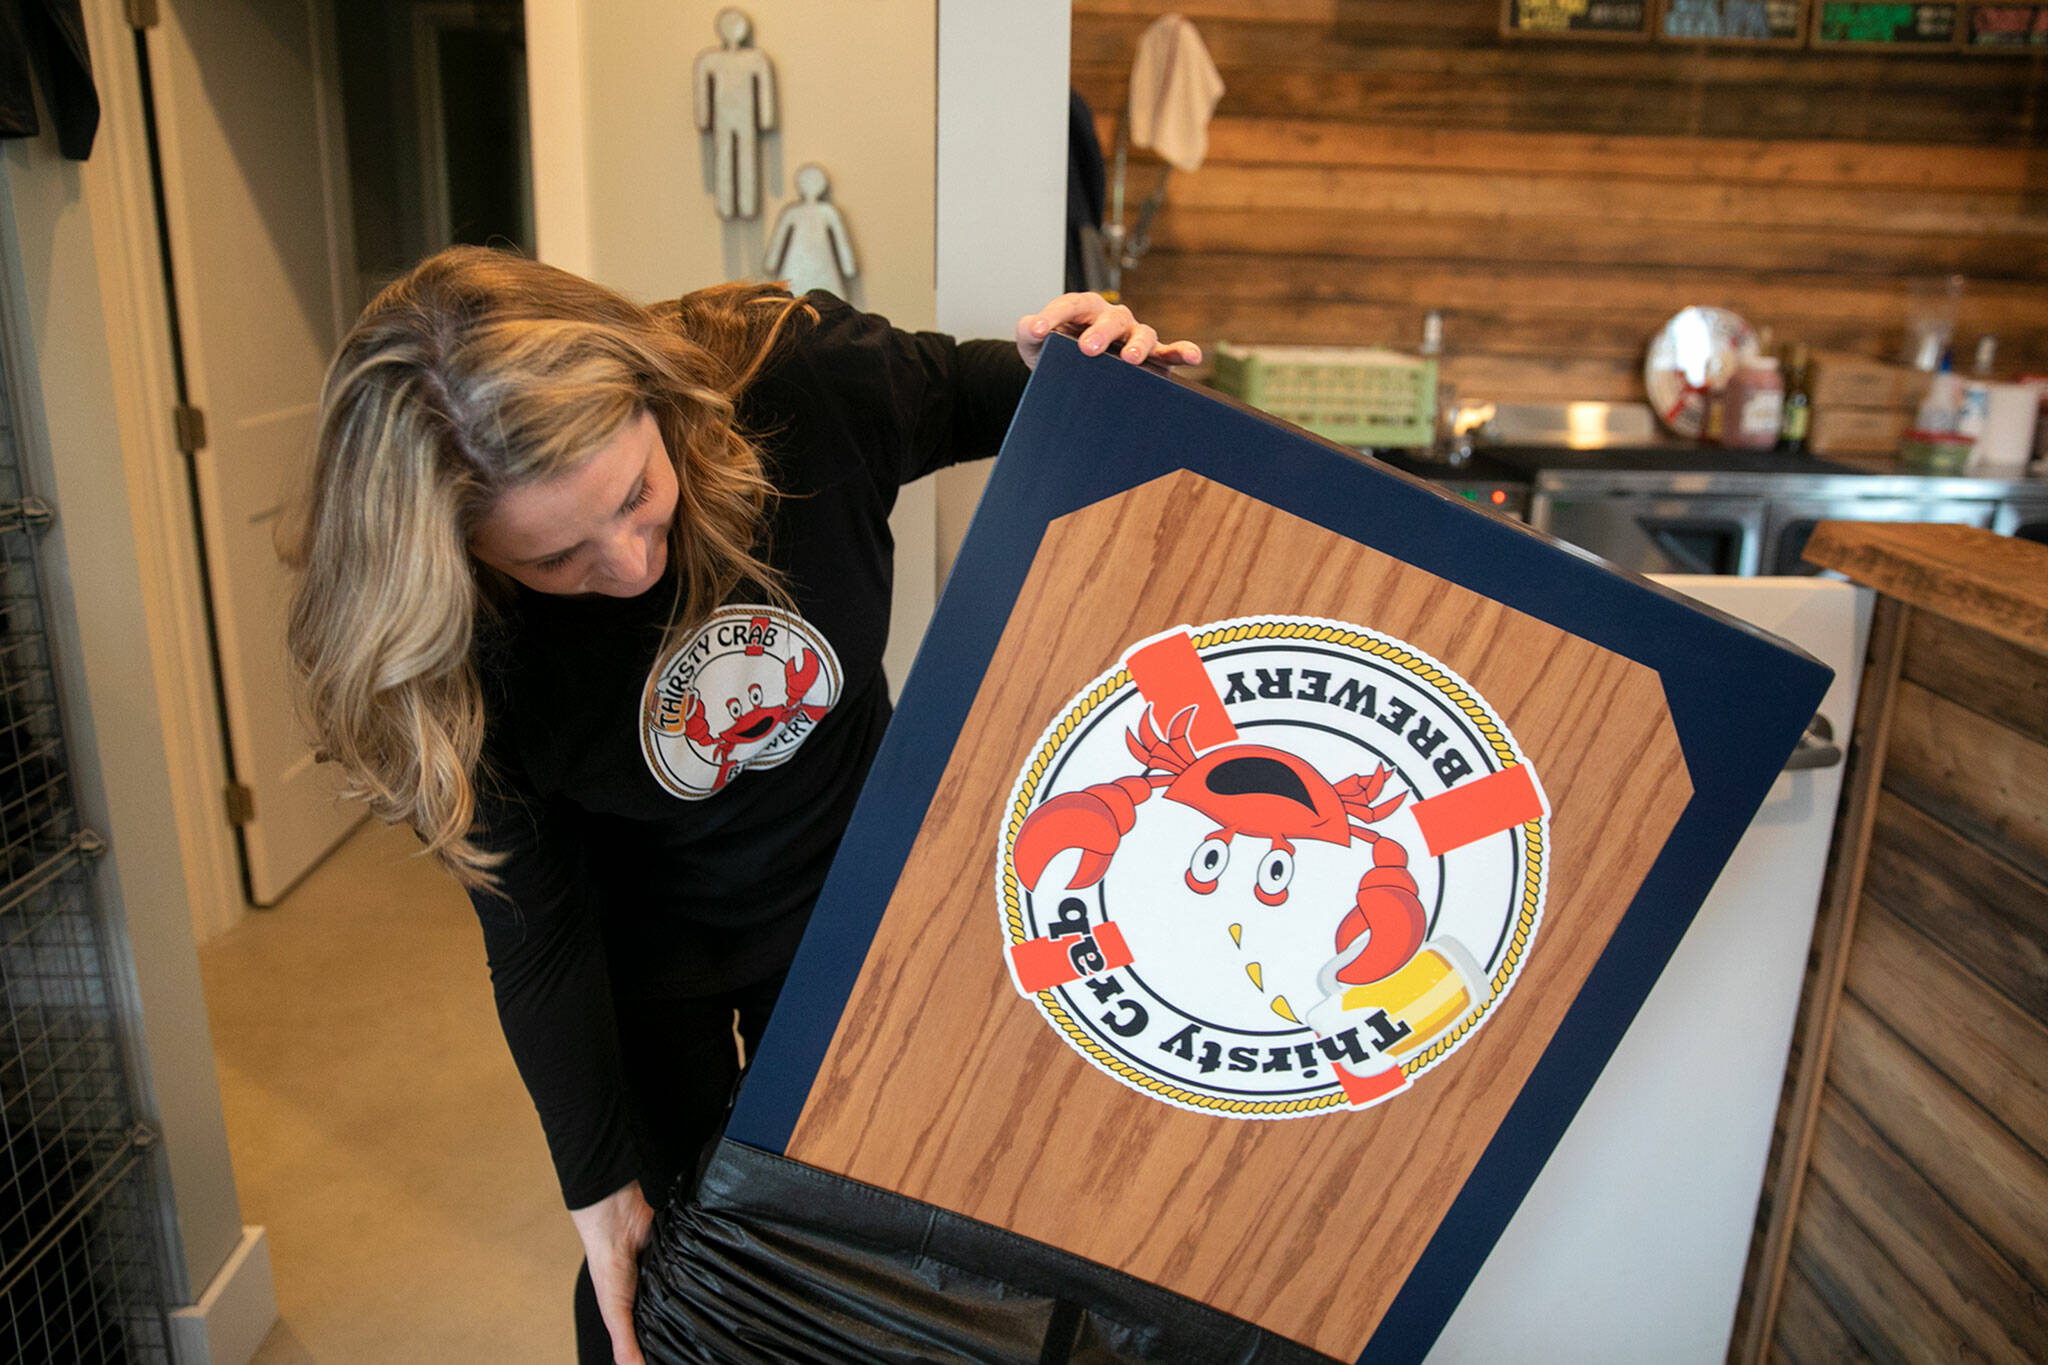 Erin Hanson shows off one of the custom bean bag toss boards available to customers at Thirsty Crab Brewery in Clinton. (Ryan Berry / The Herald)